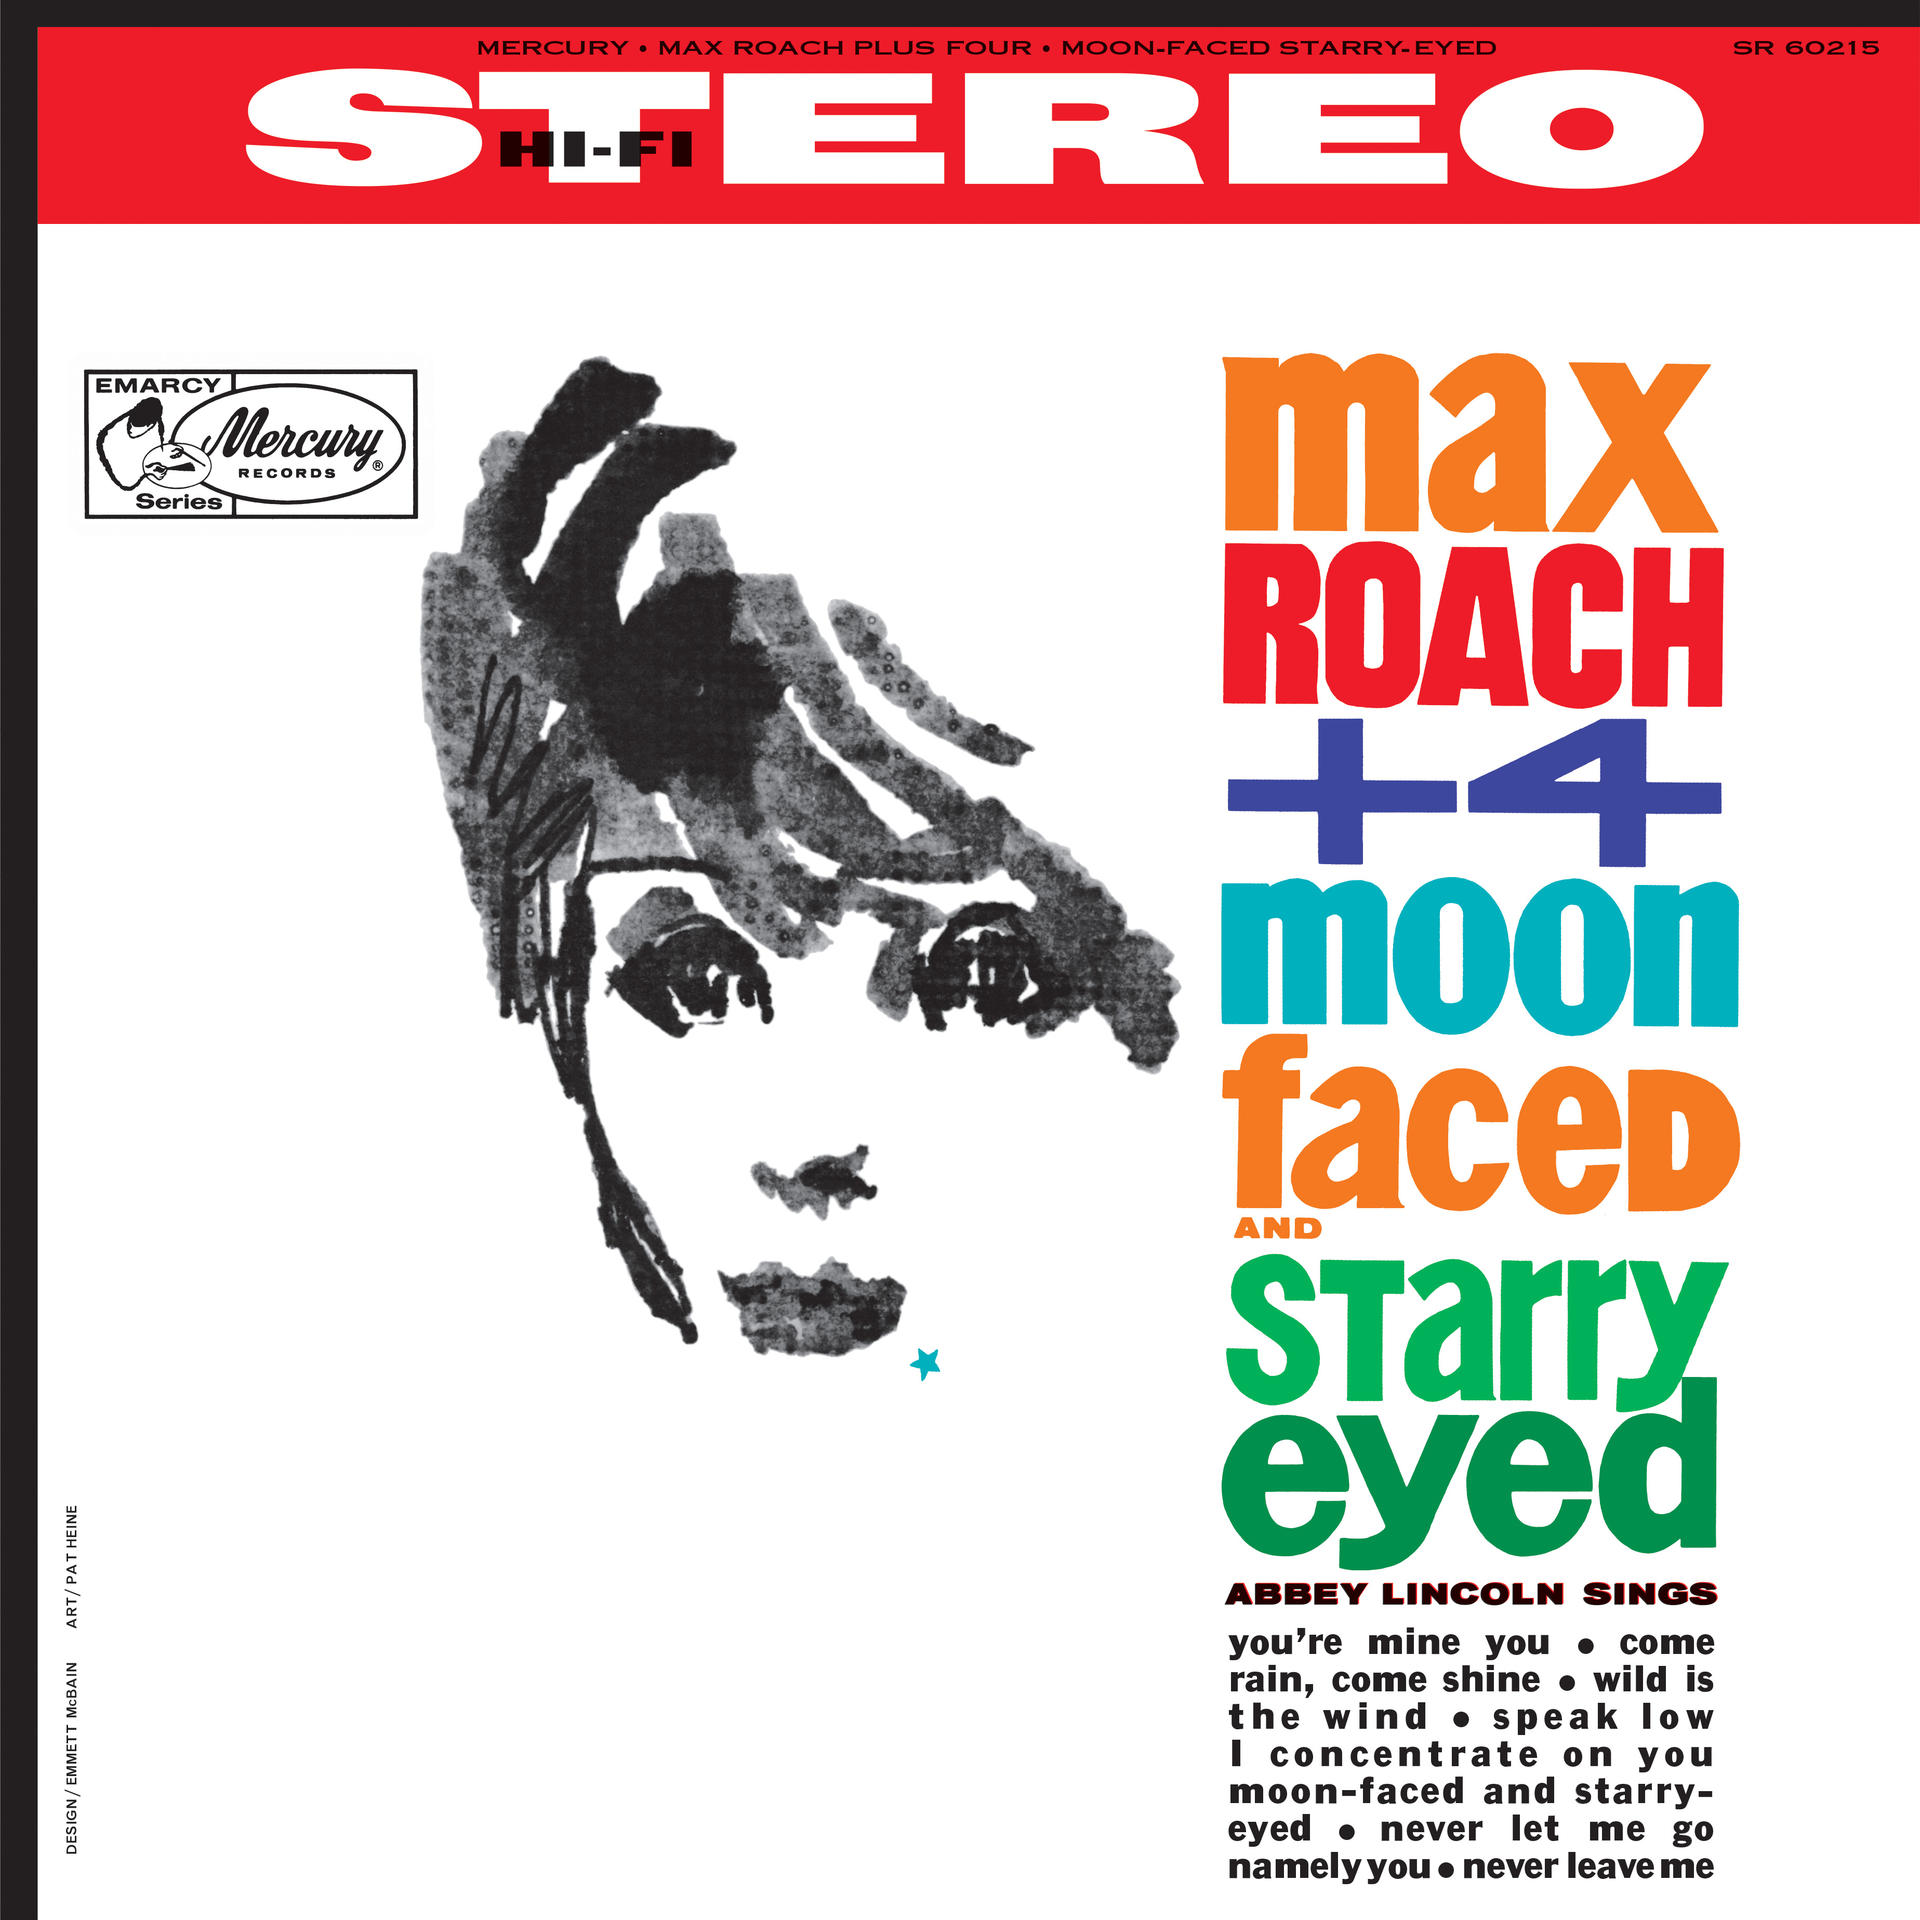 Max Roach Request) - (Vinyl) (Verve by and - Moon-Faced Starry-Eyed